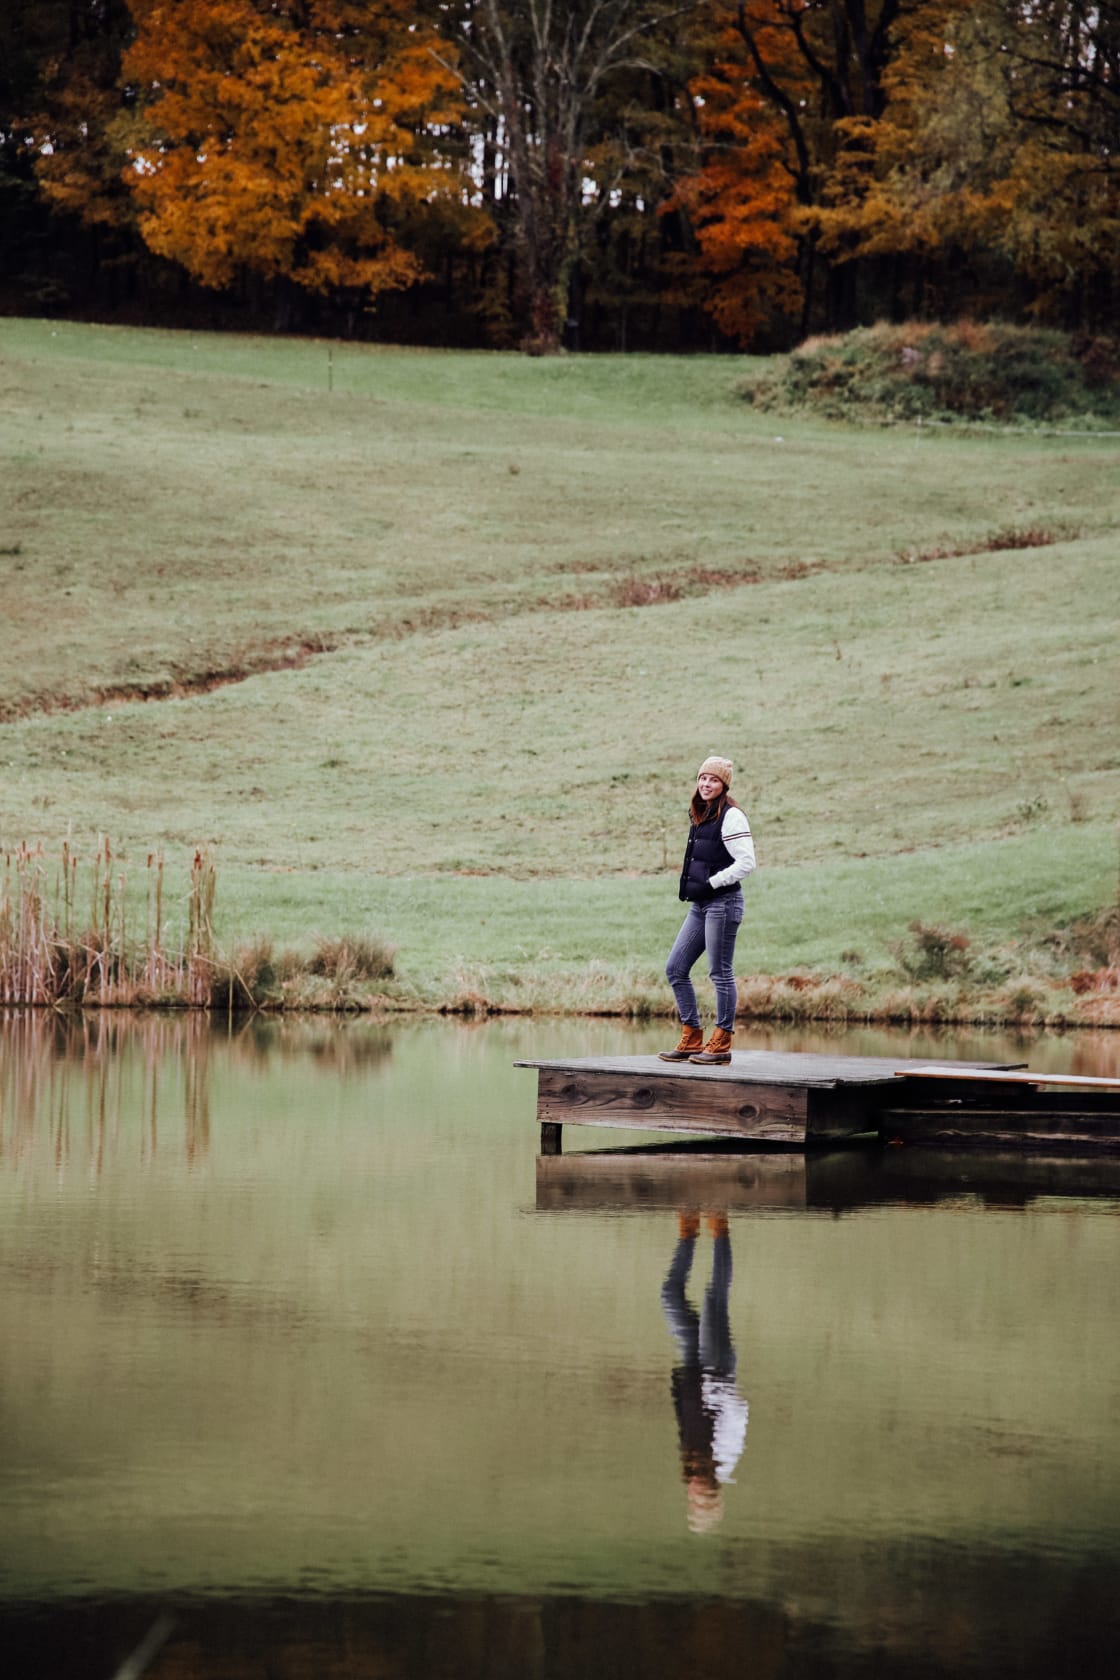 The pond was a great place for reflection. *pun intended*